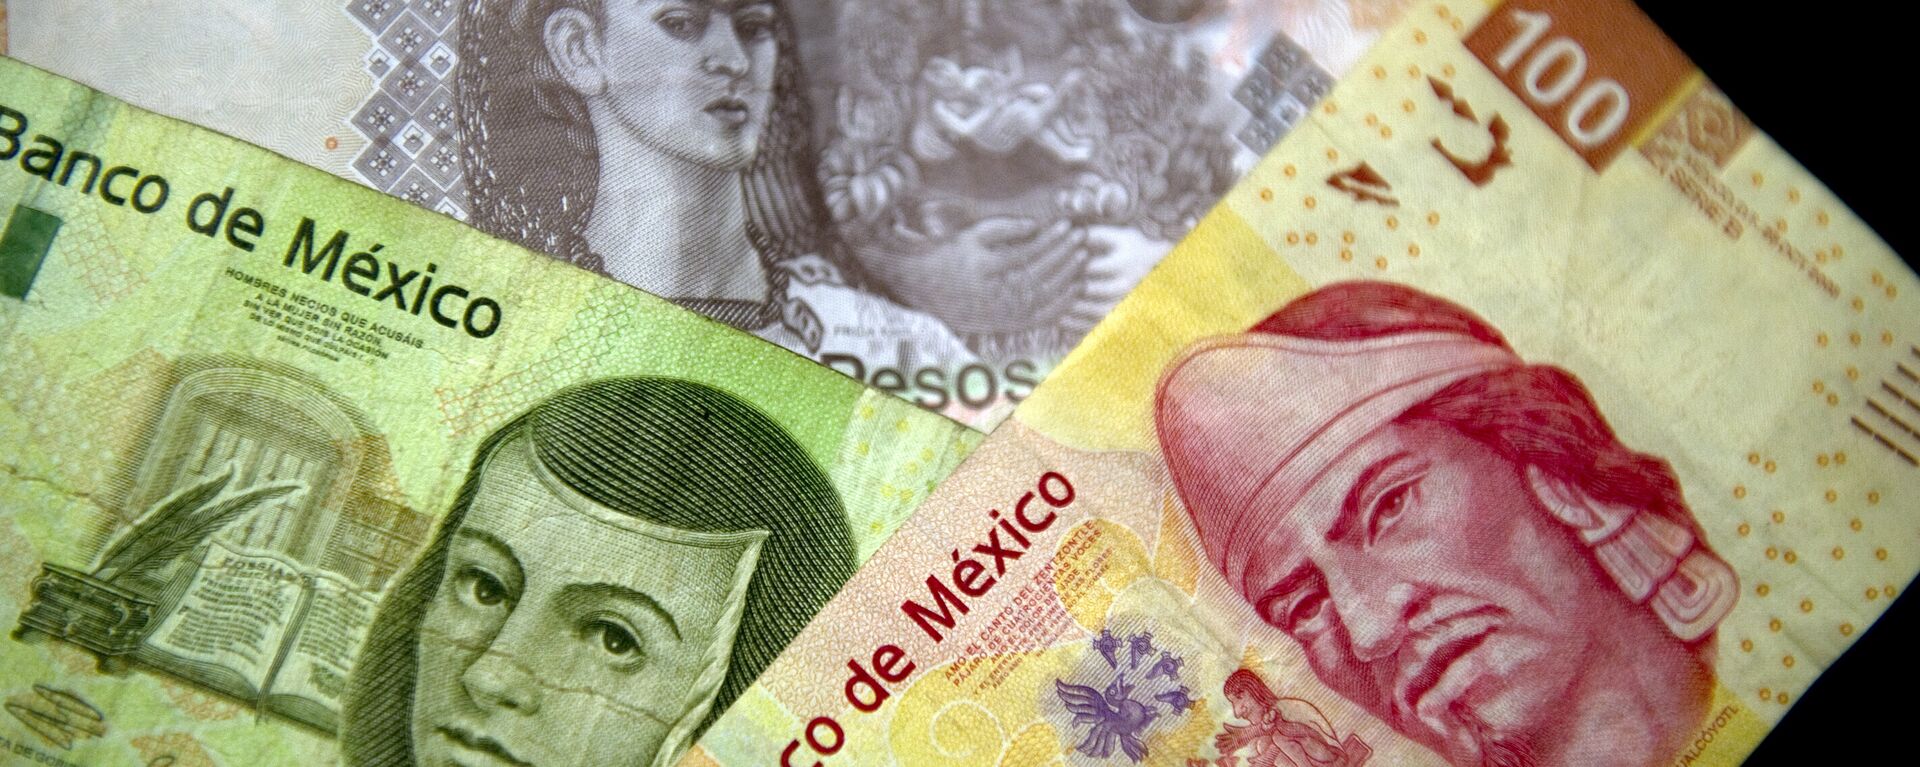 Picture of Mexican Peso notes of different denominations taken on December 27, 2011 in Mexico City - Sputnik Mundo, 1920, 03.09.2021